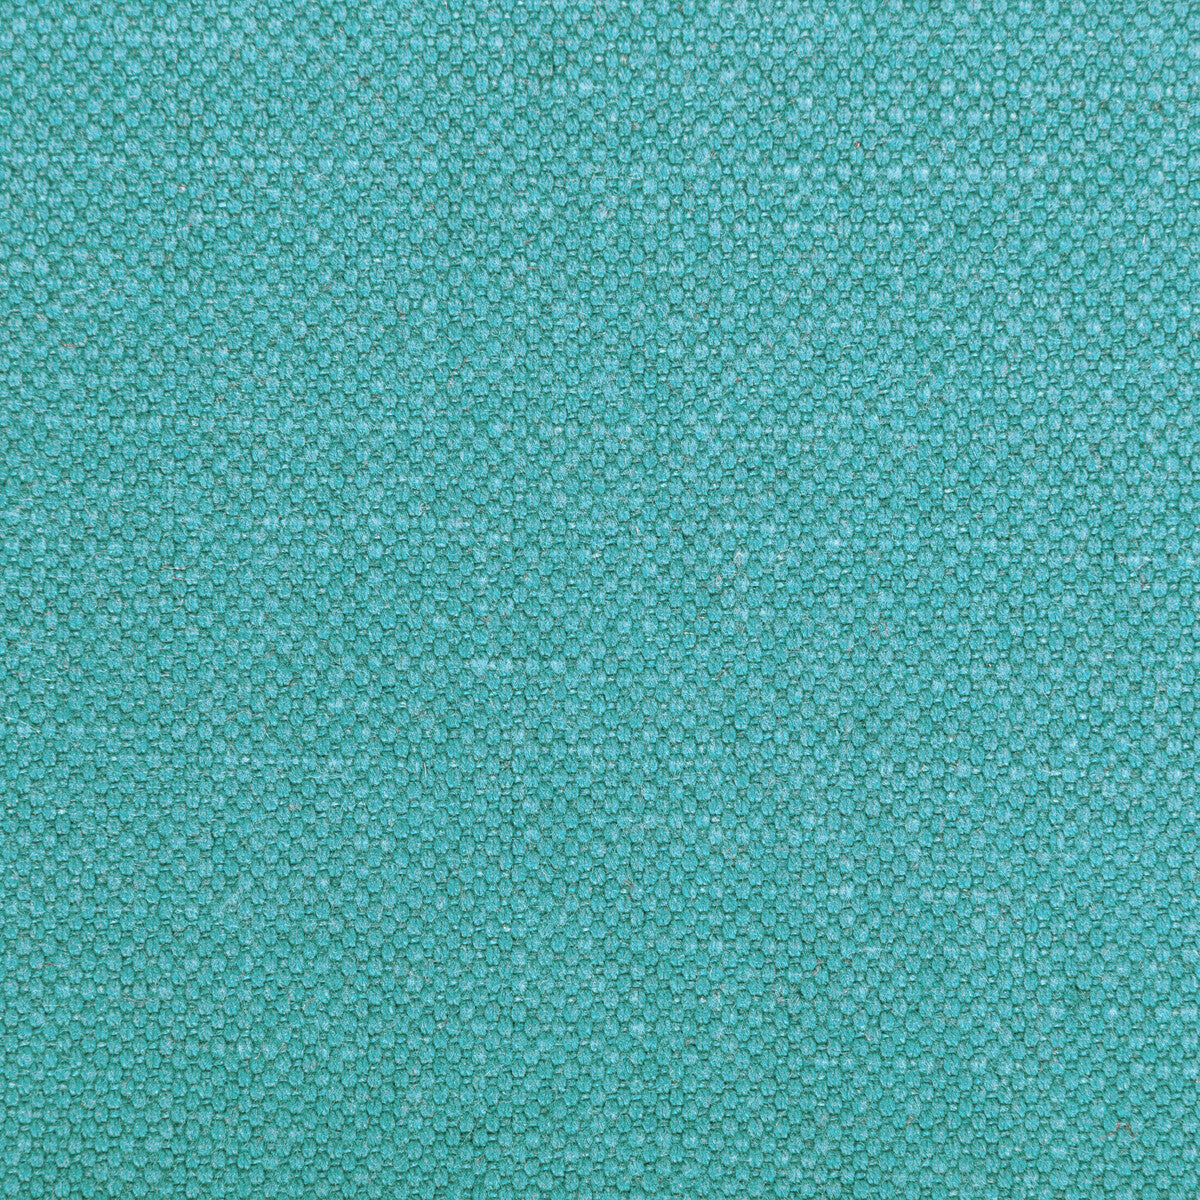 Carson fabric in surf color - pattern 36282.1315.0 - by Kravet Basics